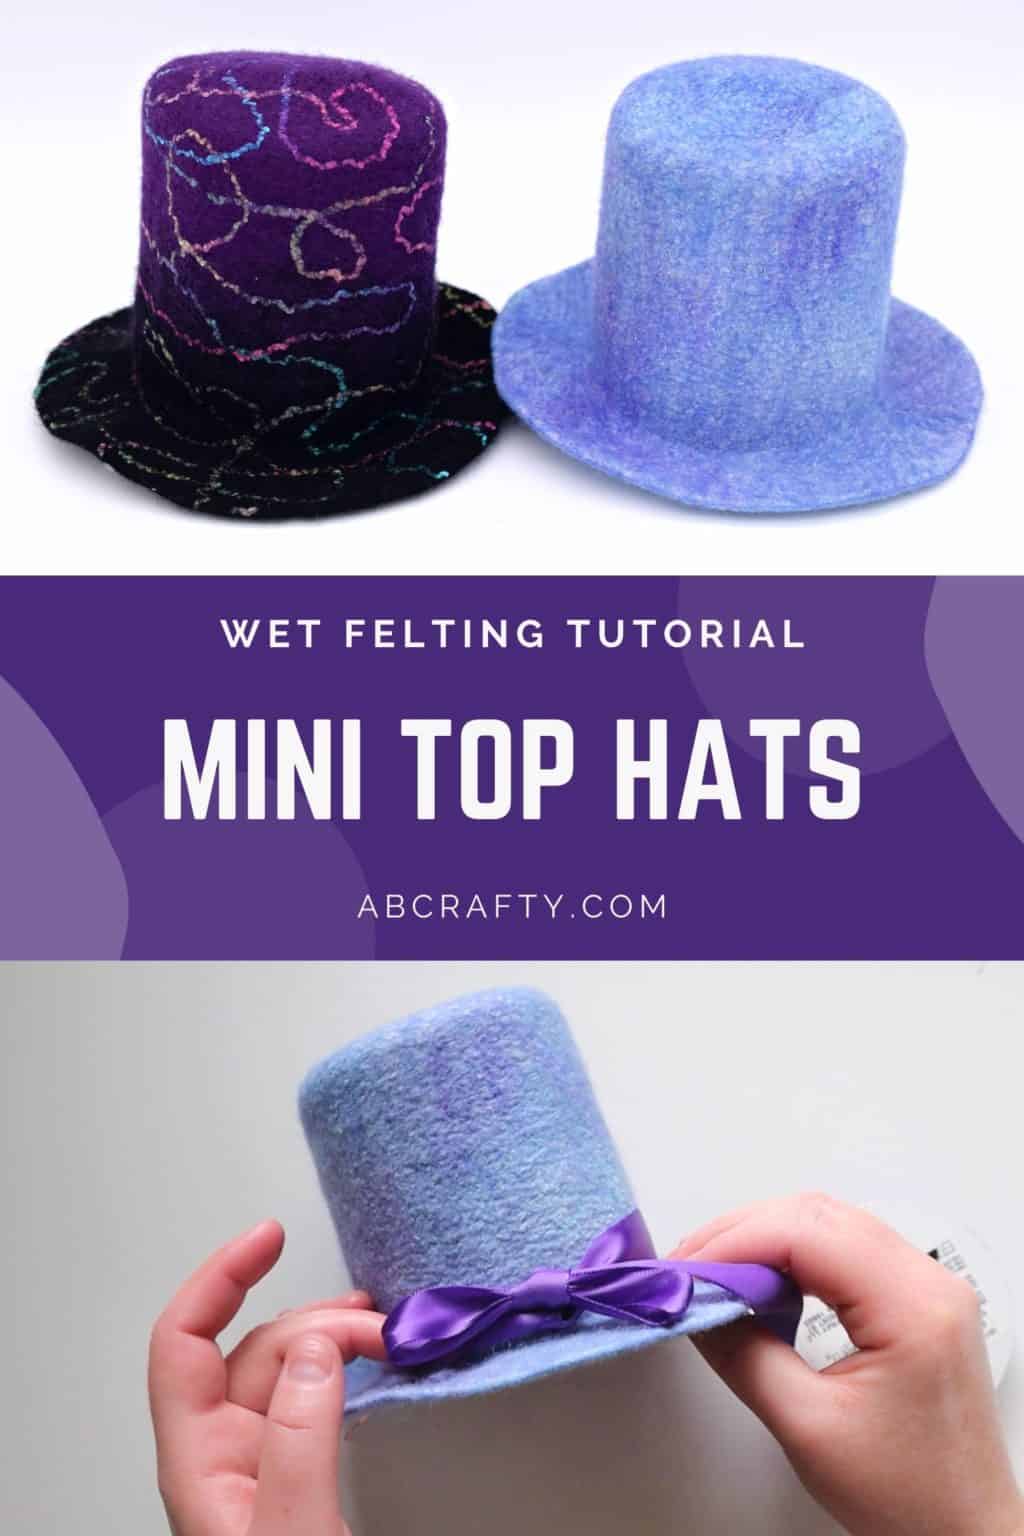 three tiny wool hats. one is black and purple with rainbow swirls, one is blue and purple tones, and one is blue and purple tones with a purple ribbon. the title reads "wet felting tutorial, mini top hats"